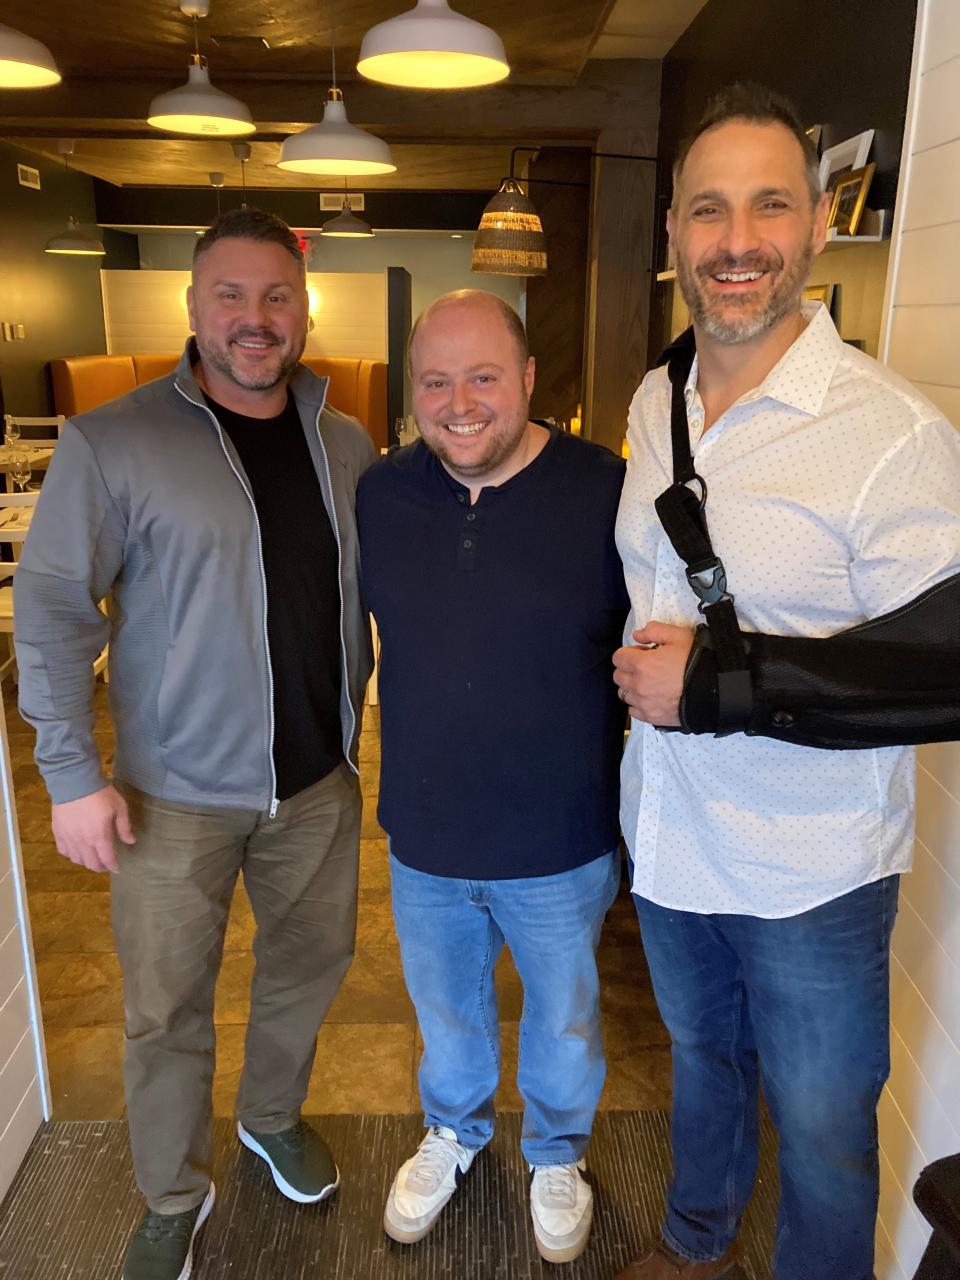 The Company Chophouse owners, from left: Nick Triscari, Ralph Battista and Doug Newhook. The three, who ran the restaurant with their wives, built their eatery around family. Photographed Feb. 17, 2022.